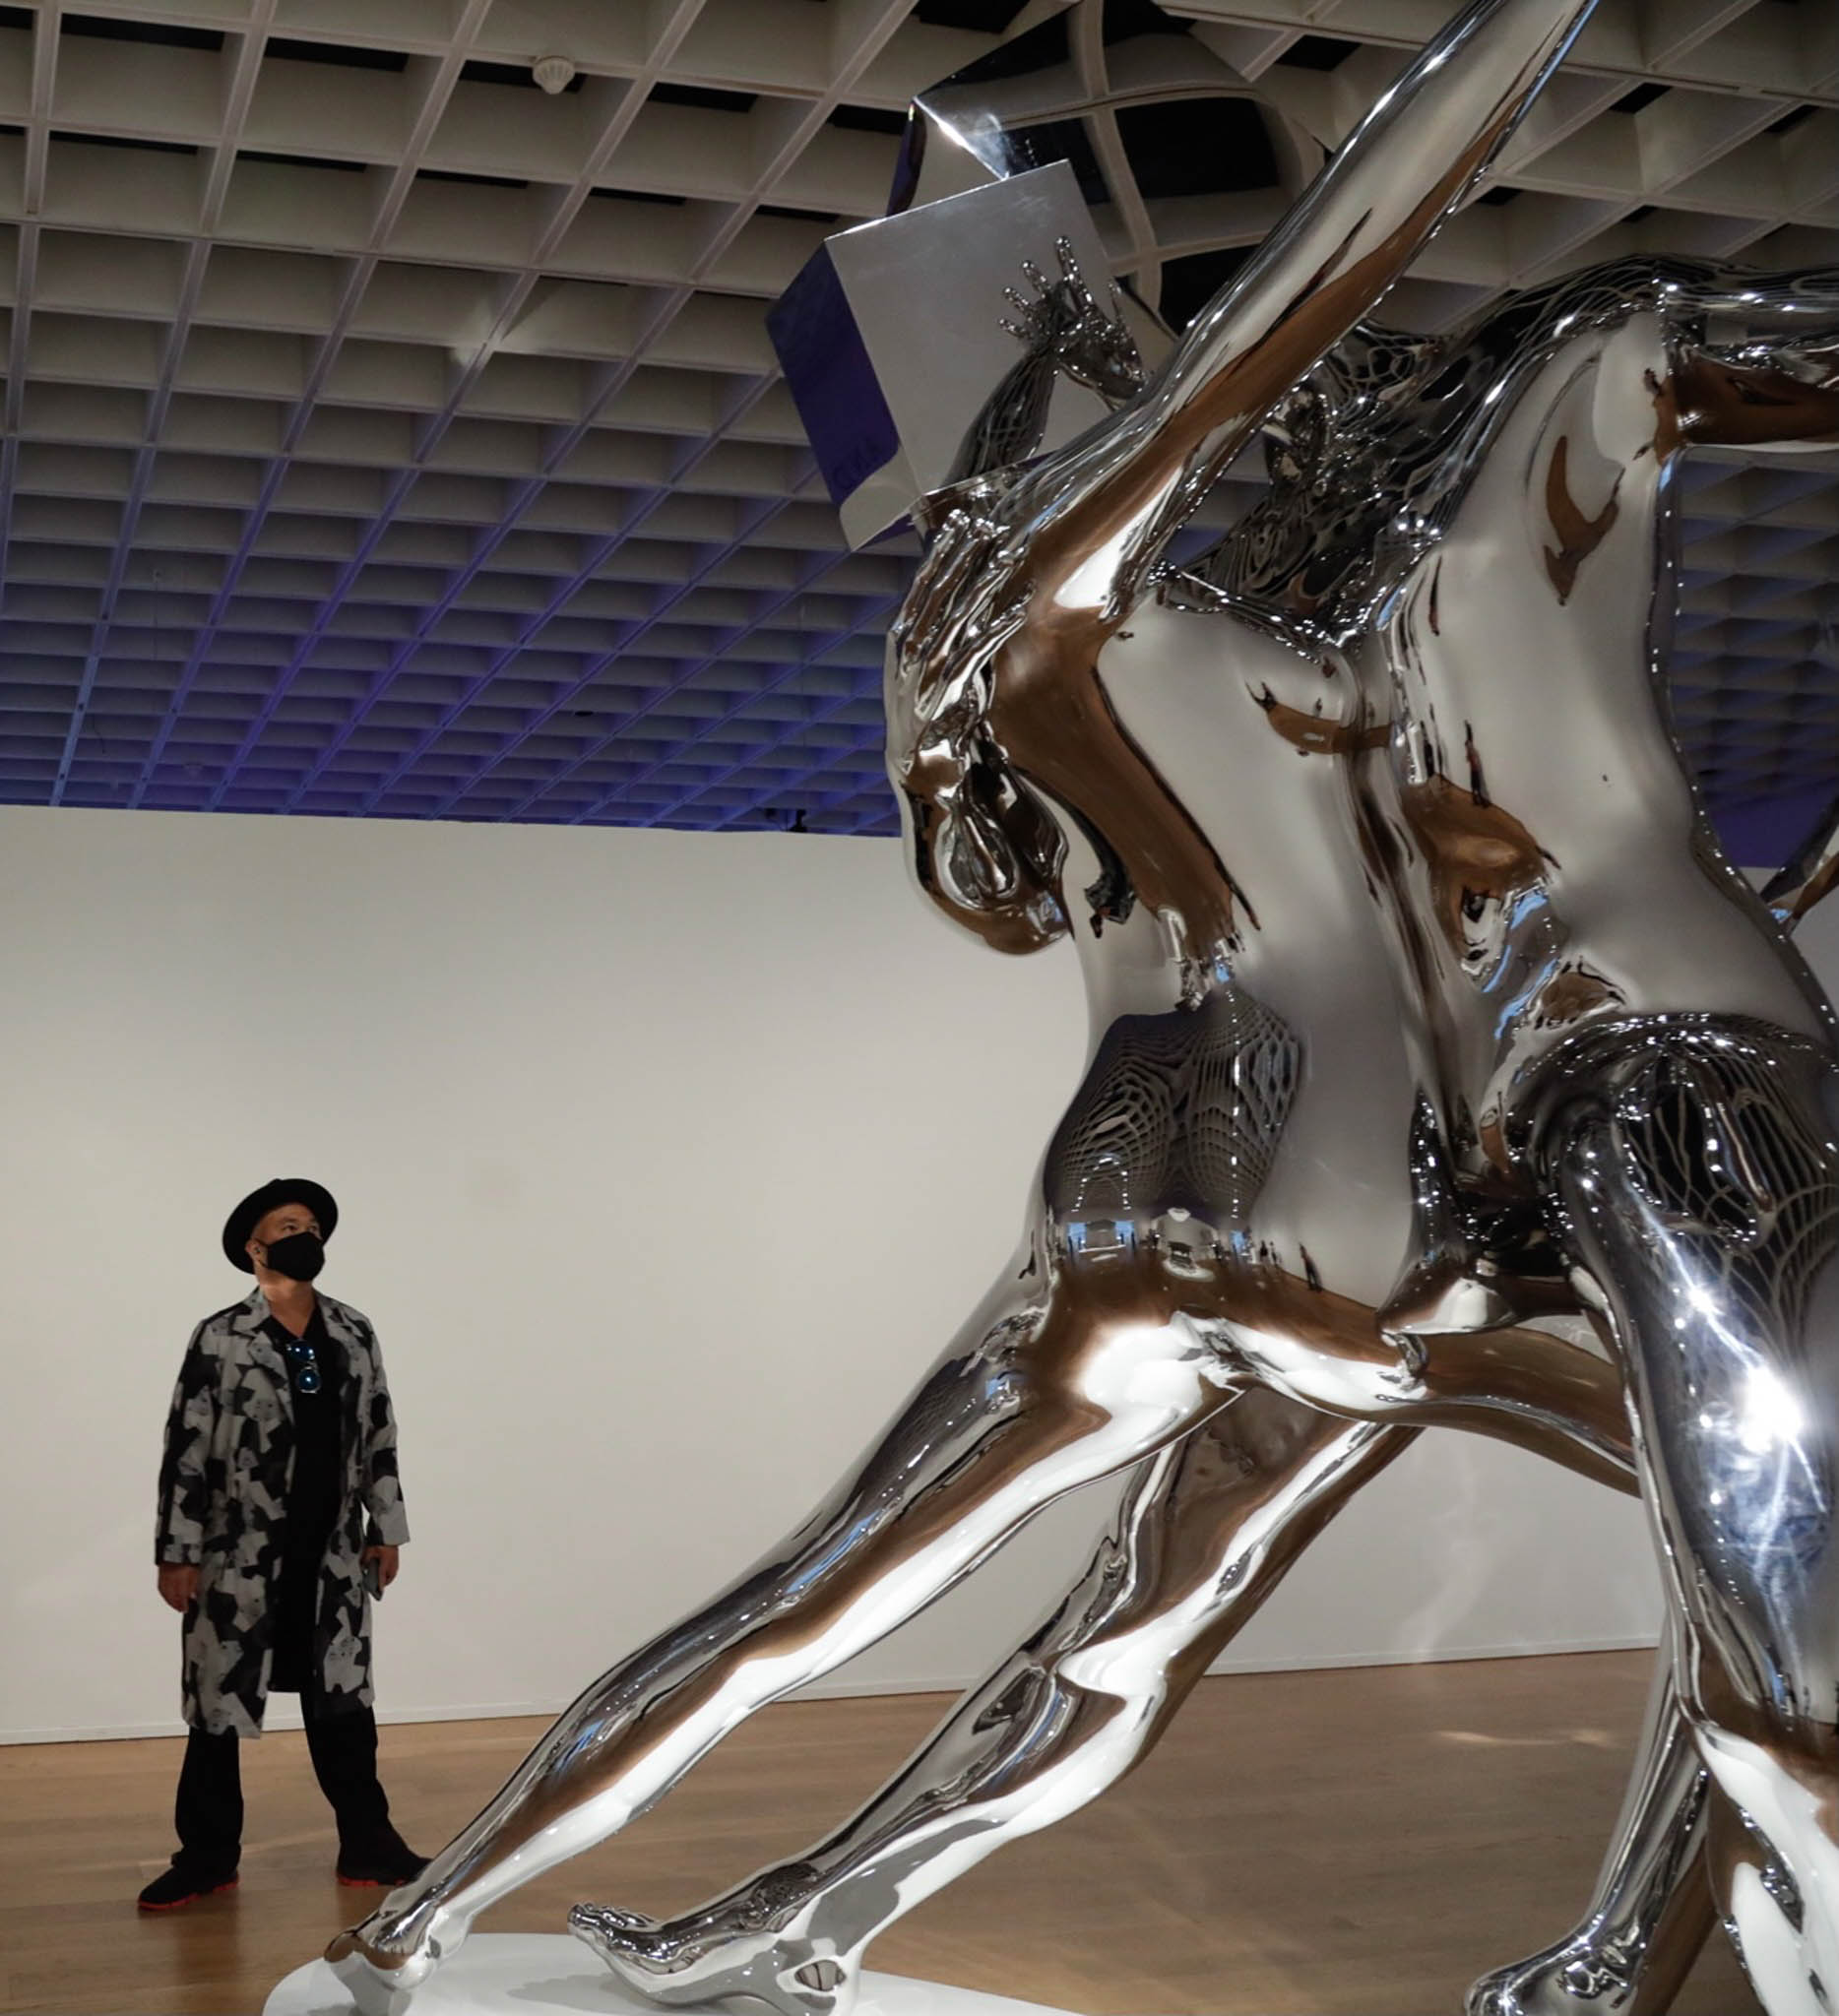 The artist standing next to one of his iconic metallic sculptures, "Passion"